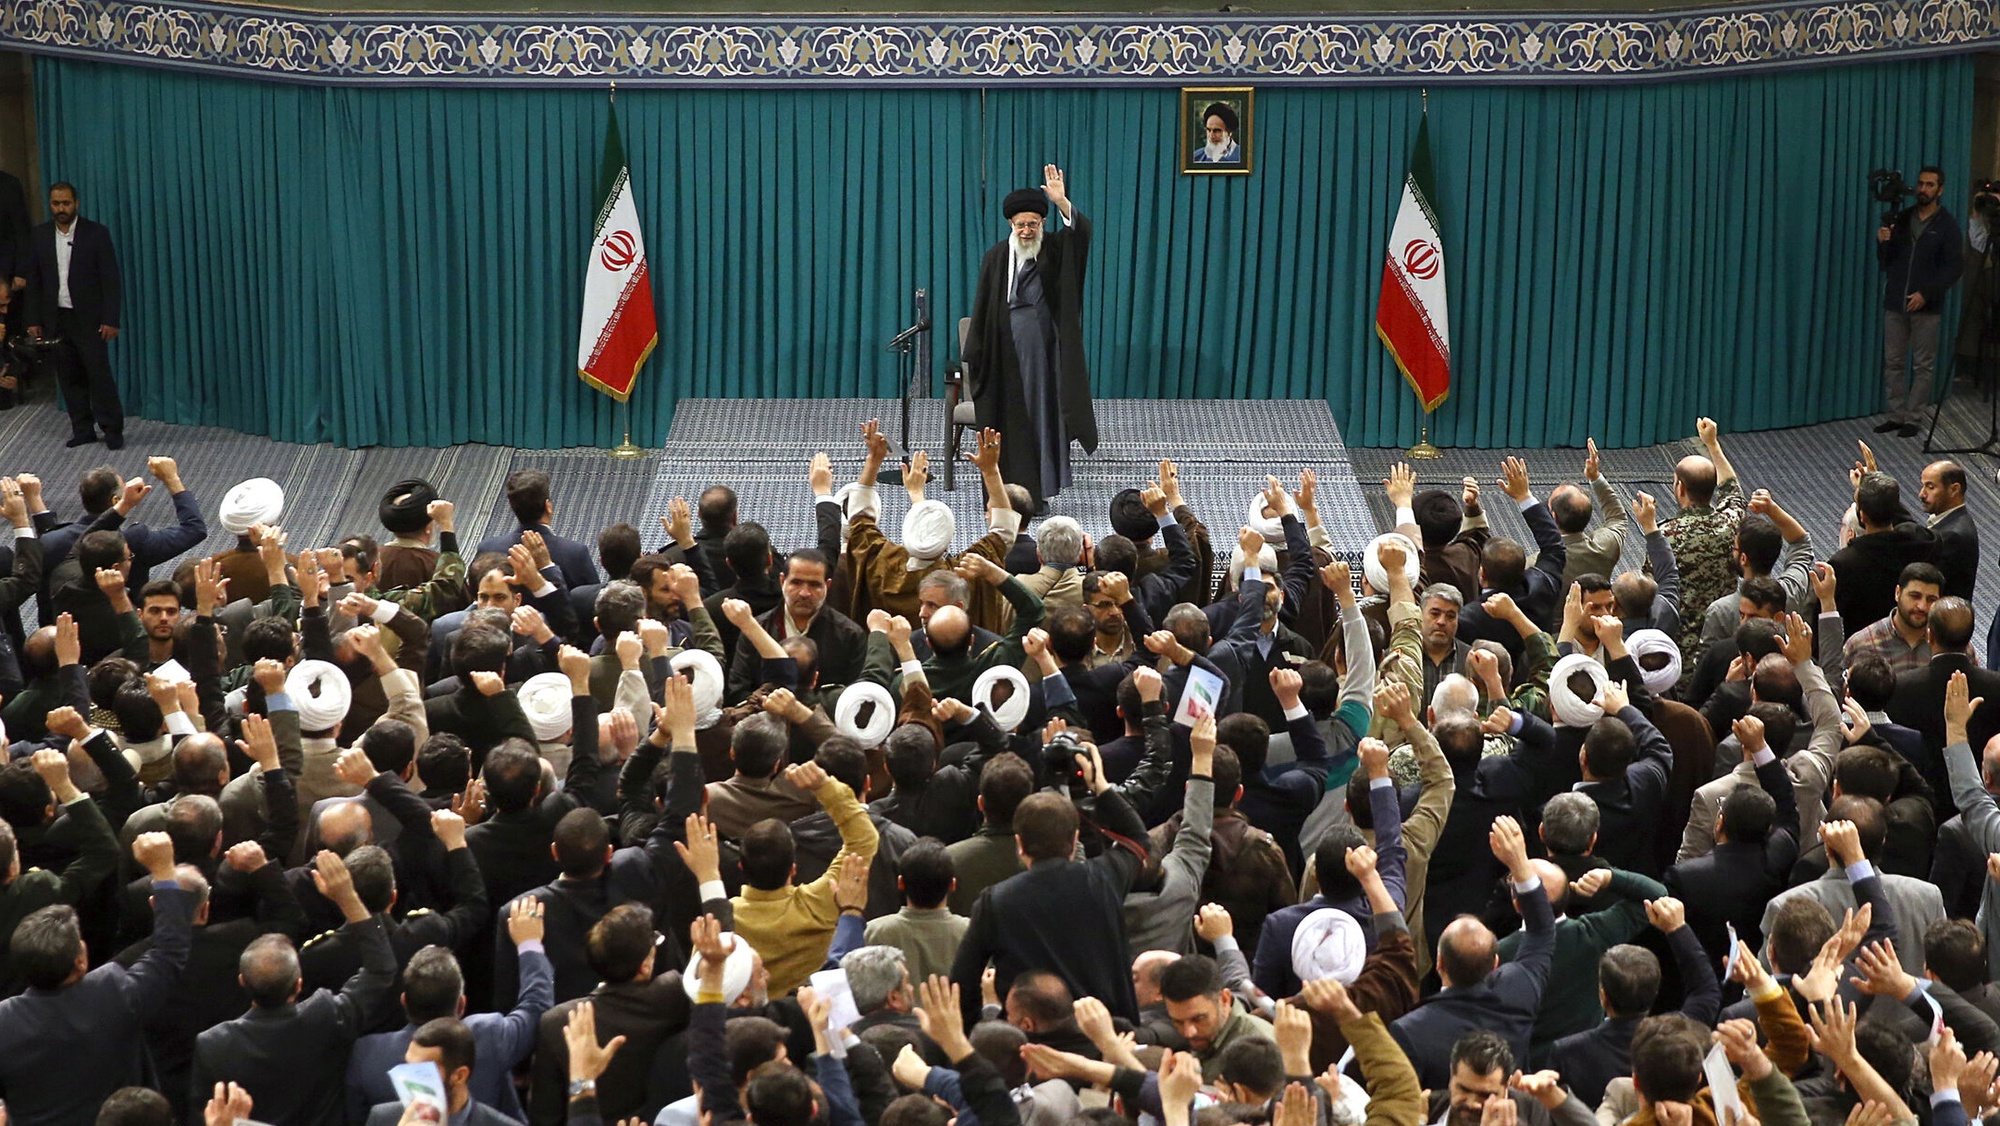 epa11162938 A handout photo made available by the Iranian supreme leader office shows, Iranian Supreme Leader Ayatollah Ali Khamenei waving to the crowd during a meeting in Tehran, Iran, 18 February 2024. According to Khamenei&#039;s official website, Khamenei asked Iranians to have massive participation in the upcoming parliamentary election and disappoint their &#039;enemies&#039;. Iran&#039;s legislative elections will be held on 01 March 2024.  EPA/IRANIAN SUPREME LEADER OFFICE / HANDOUT  HANDOUT EDITORIAL USE ONLY/NO SALES HANDOUT EDITORIAL USE ONLY/NO SALES